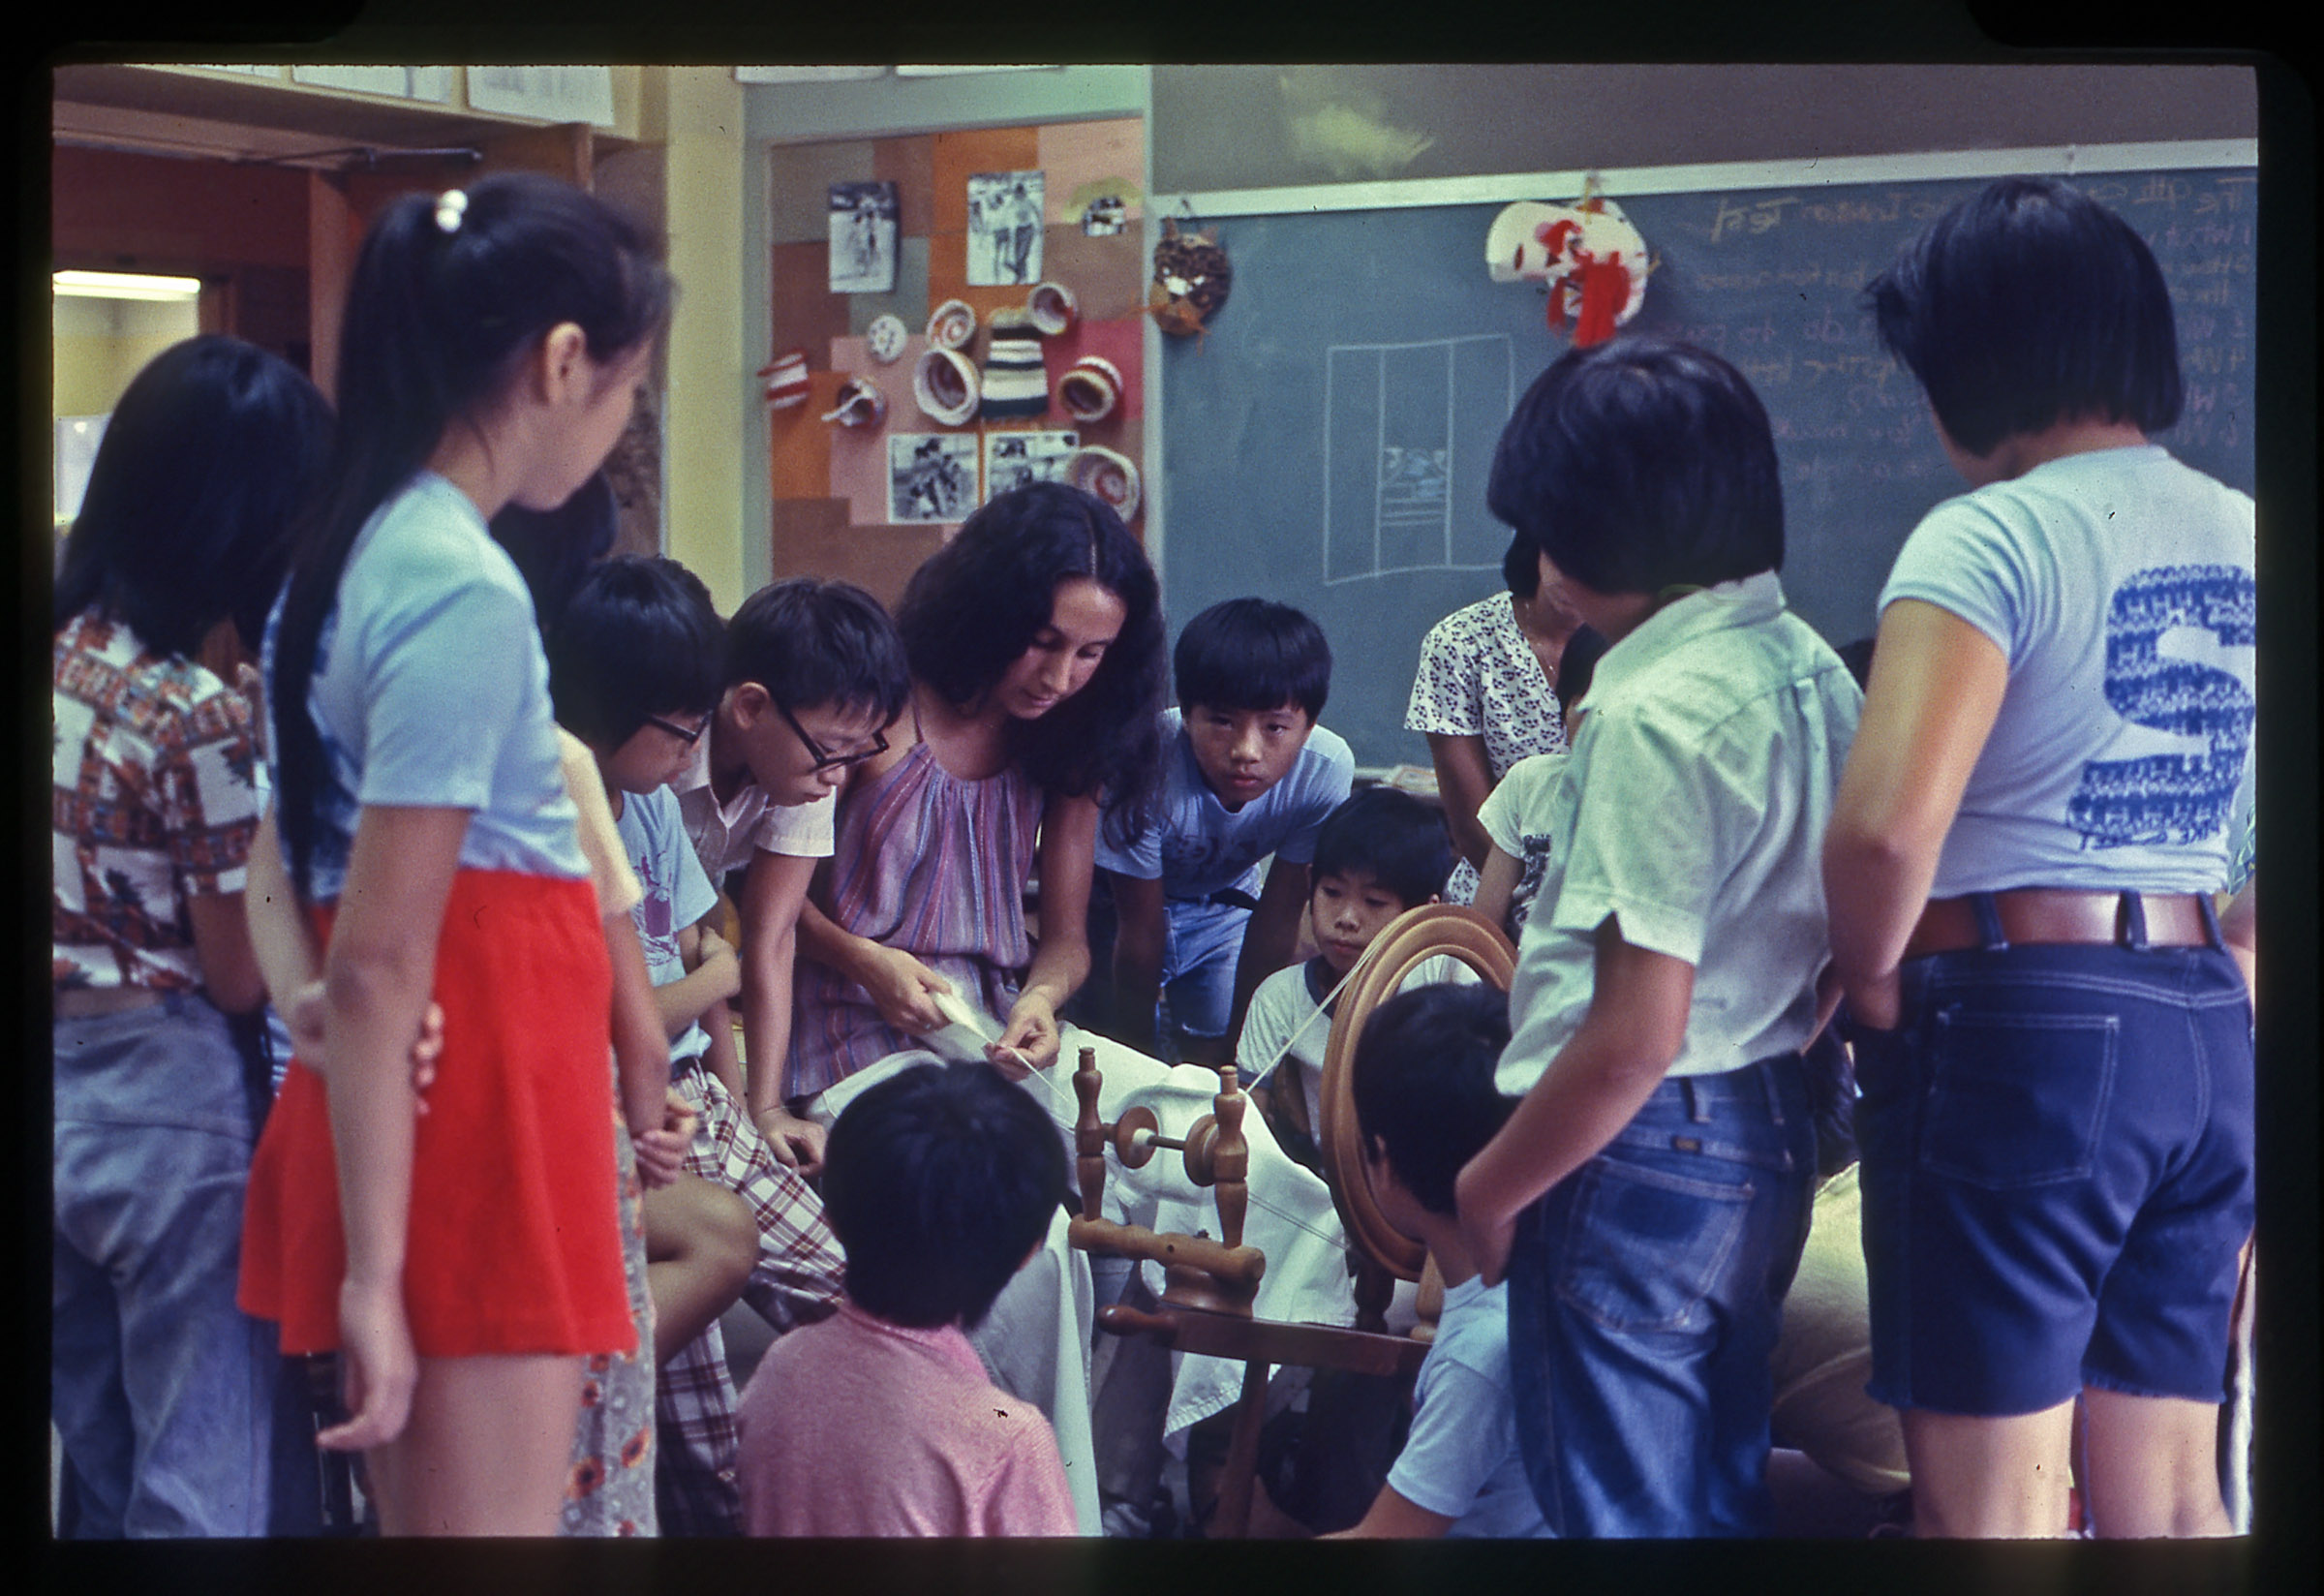 A woman with long dark hair parted down the middle is surrounded by over a dozen grade school children in a classroom. There is a chalkboard and various crafts on the wall in the background. Everyone's focus is toward the center of the image, where the woman is demonstrating weaving using white yarn and a manual wooden device.